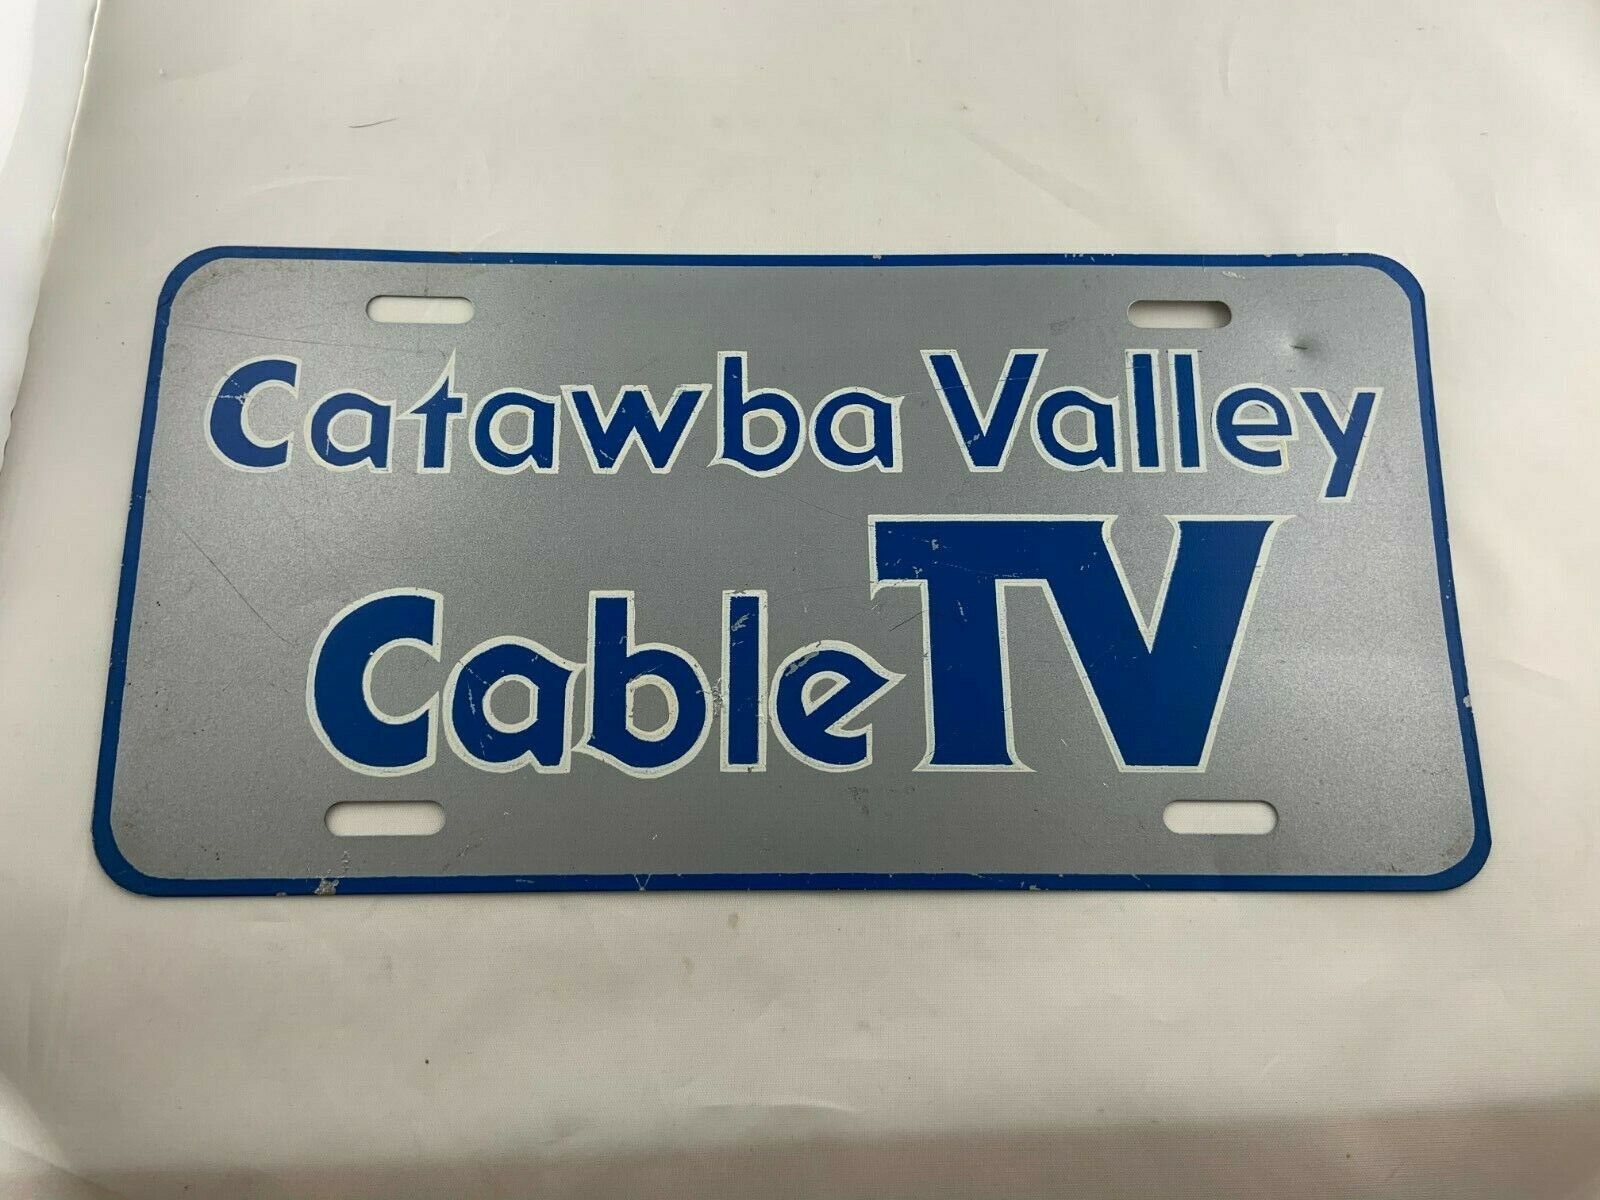 Catawba Valley Cable TV Licence Plate